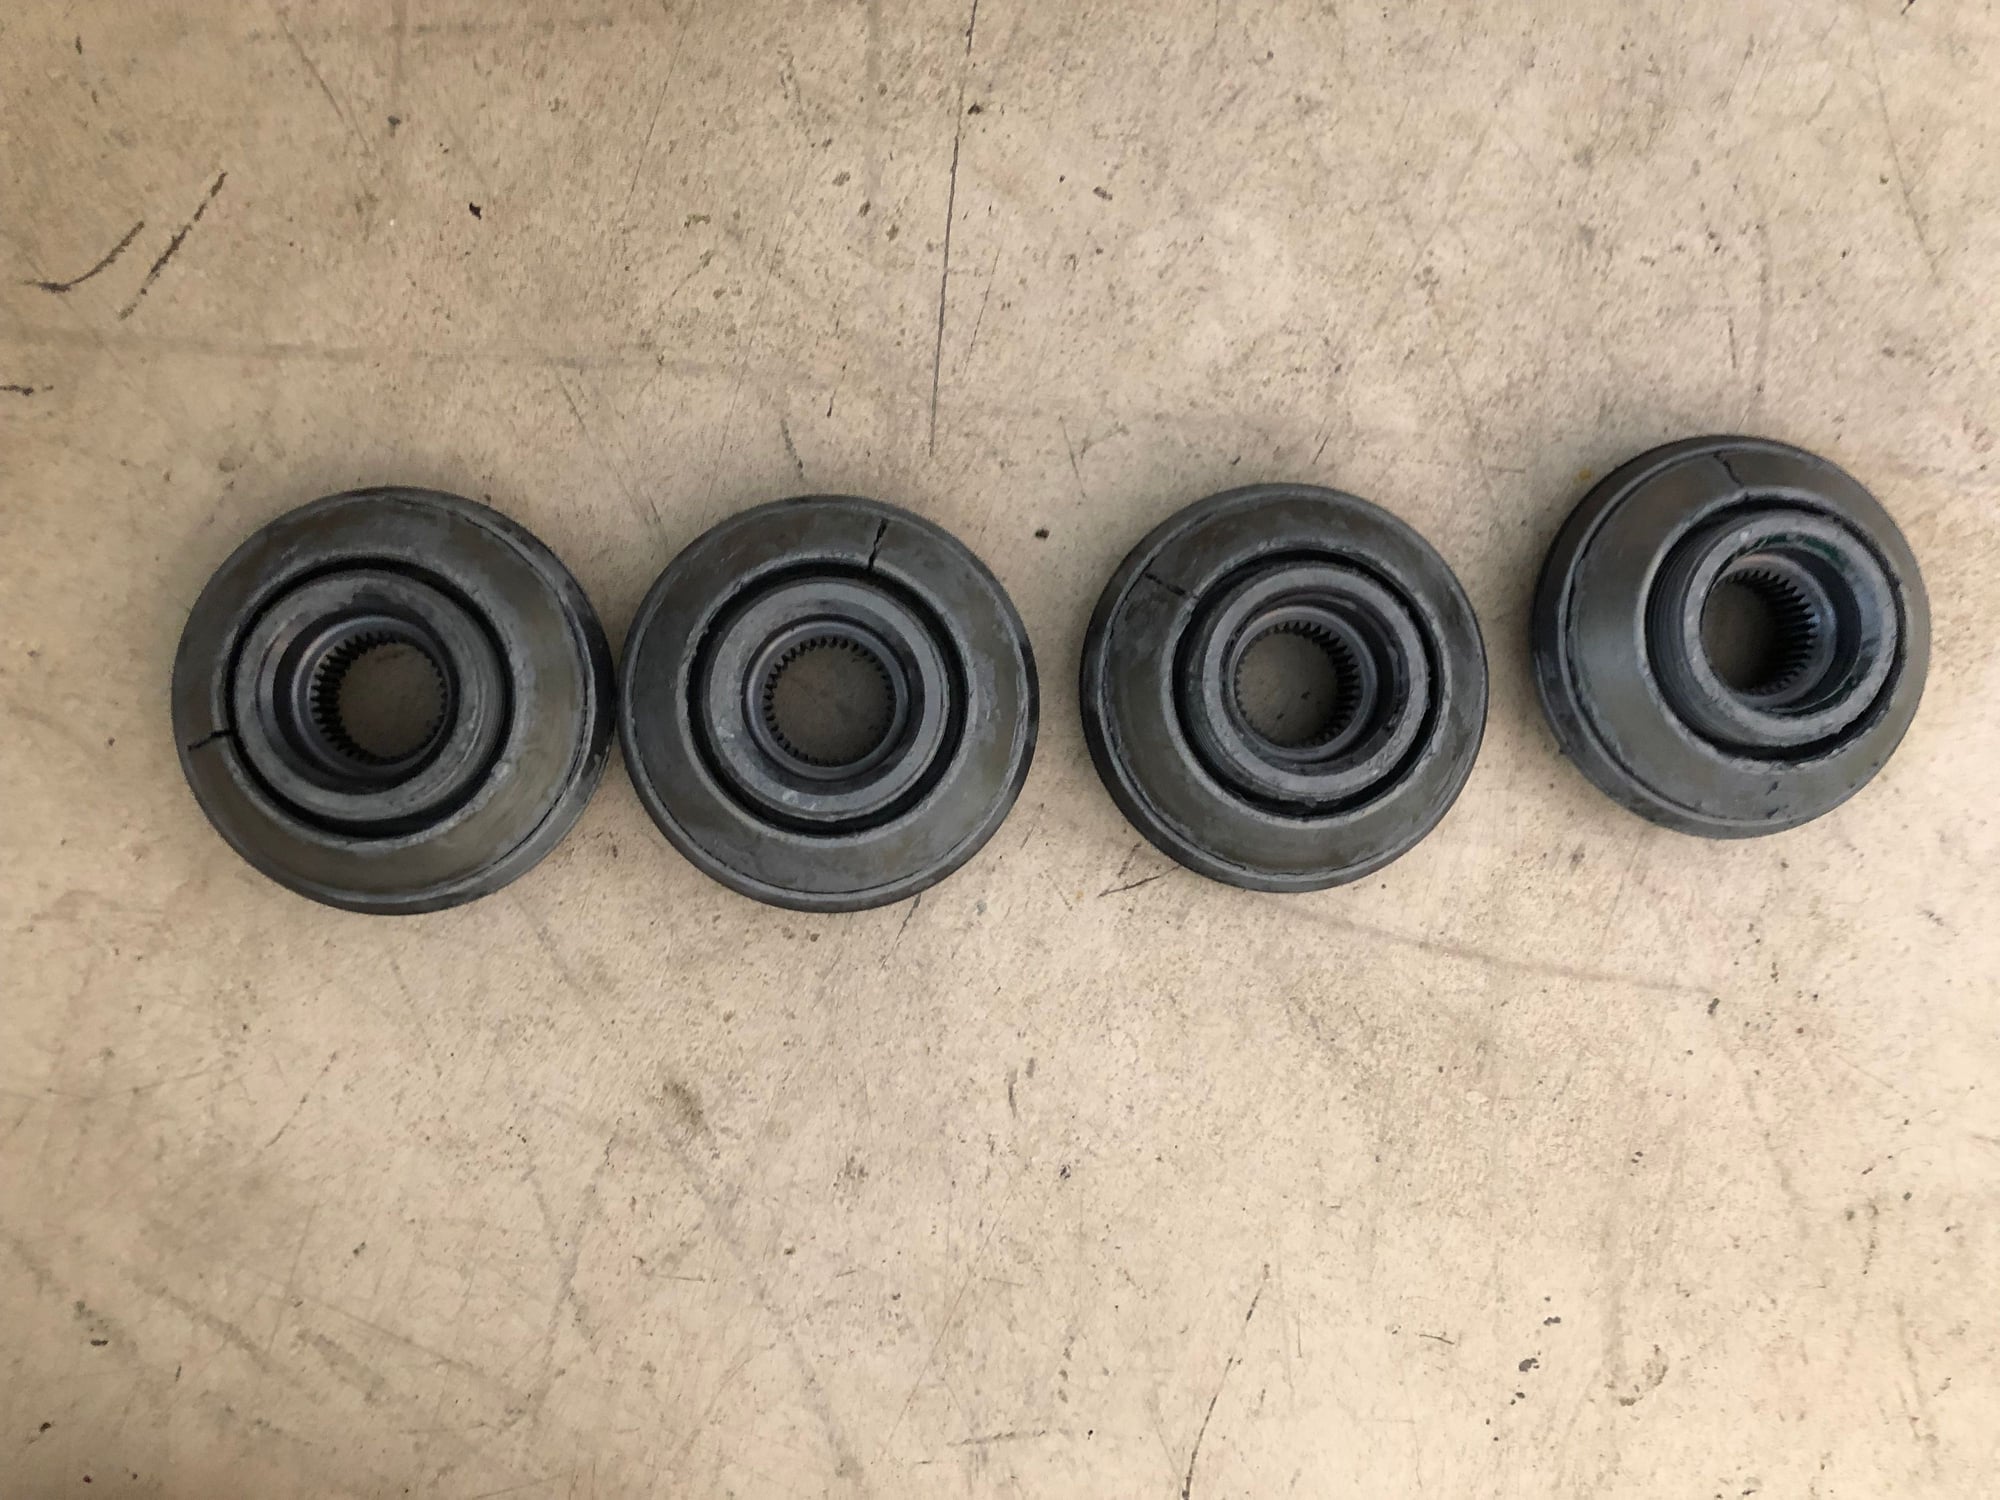 Wheels and Tires/Axles - Porsche 997.2 Center Lock Nuts from 2011 GTS - Used - 2011 to 2012 Porsche 911 - Davie, FL 33325, United States